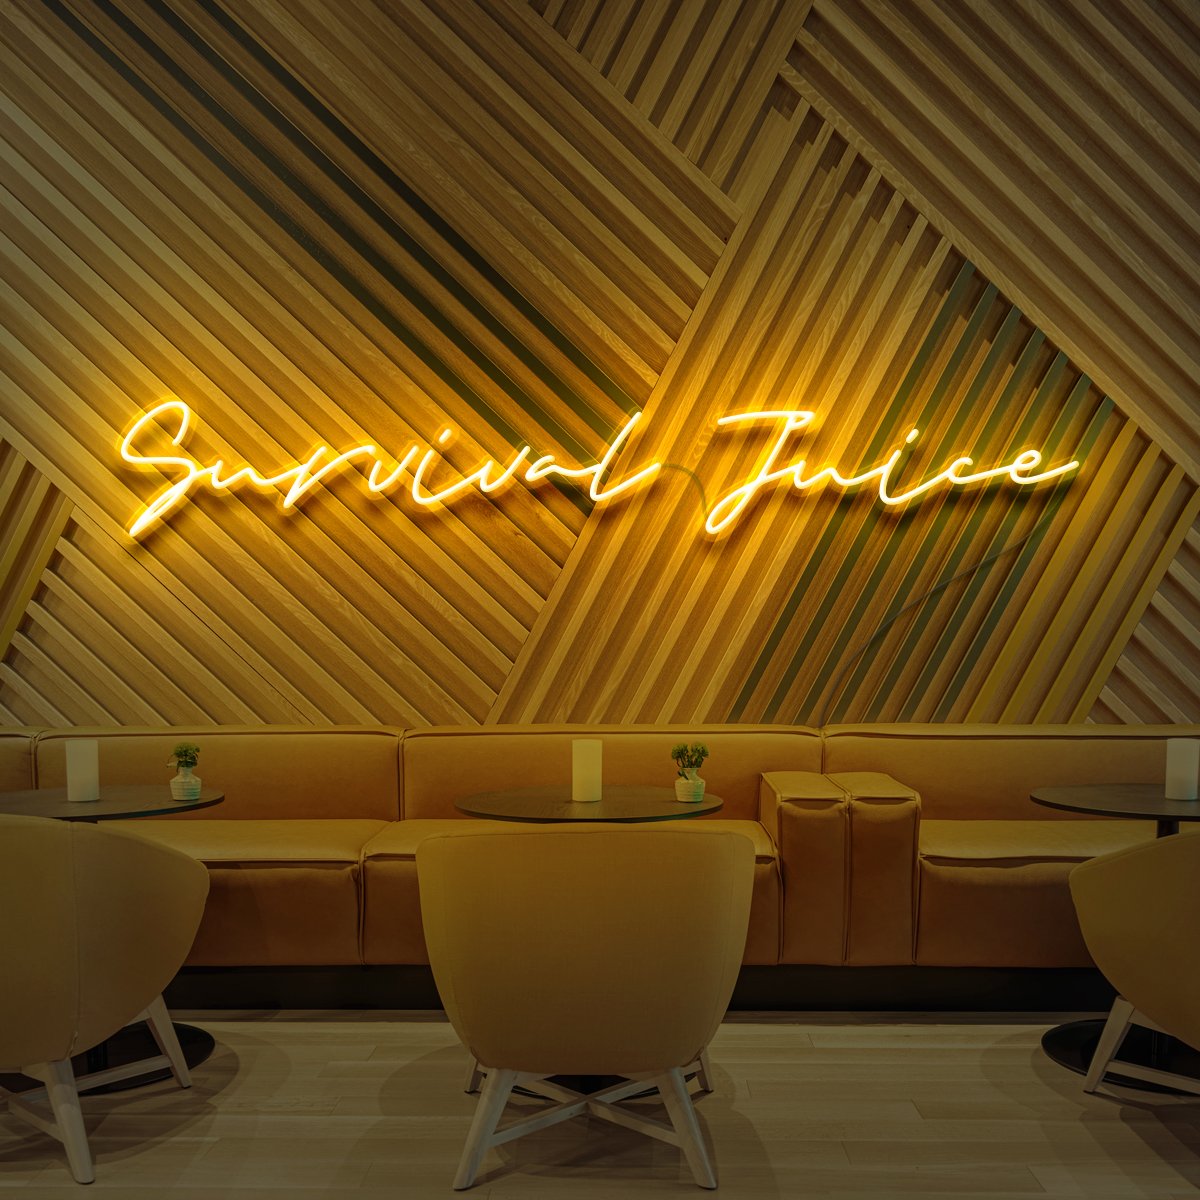 "Survival Juice" Neon Sign for Cafés 90cm (3ft) / Yellow / LED Neon by Neon Icons